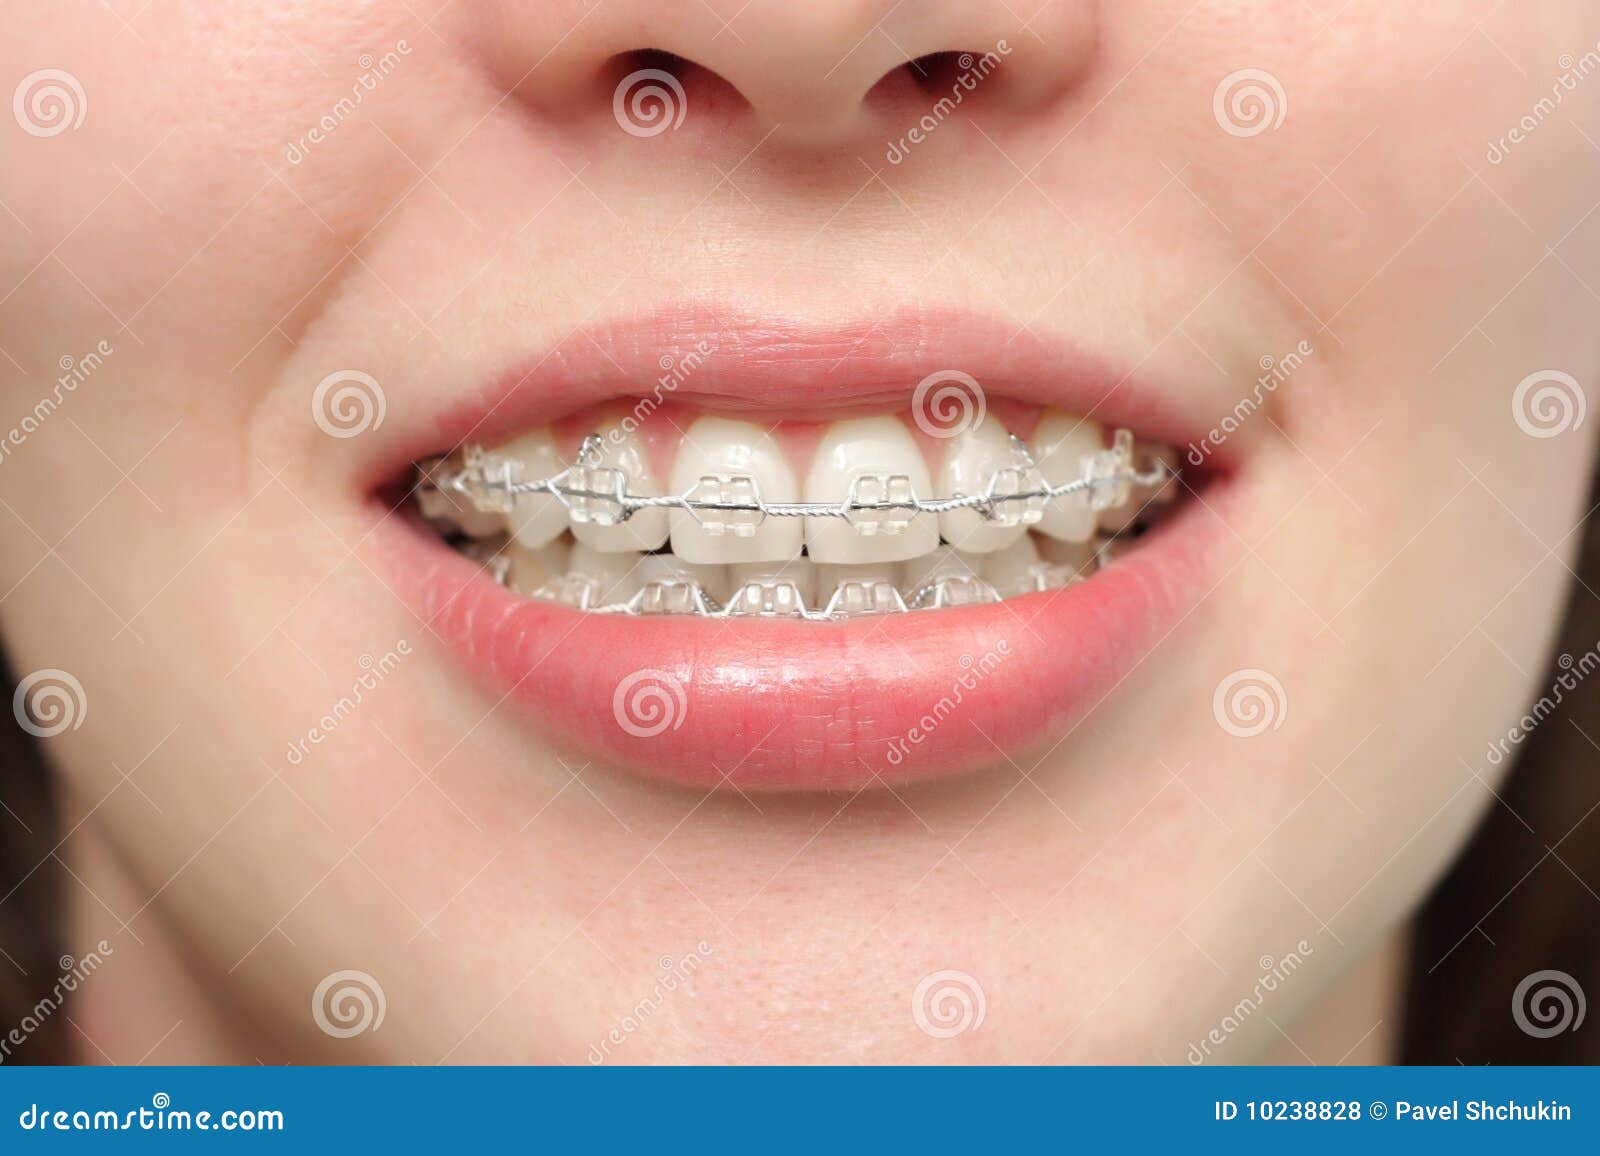 girl smiles with braces